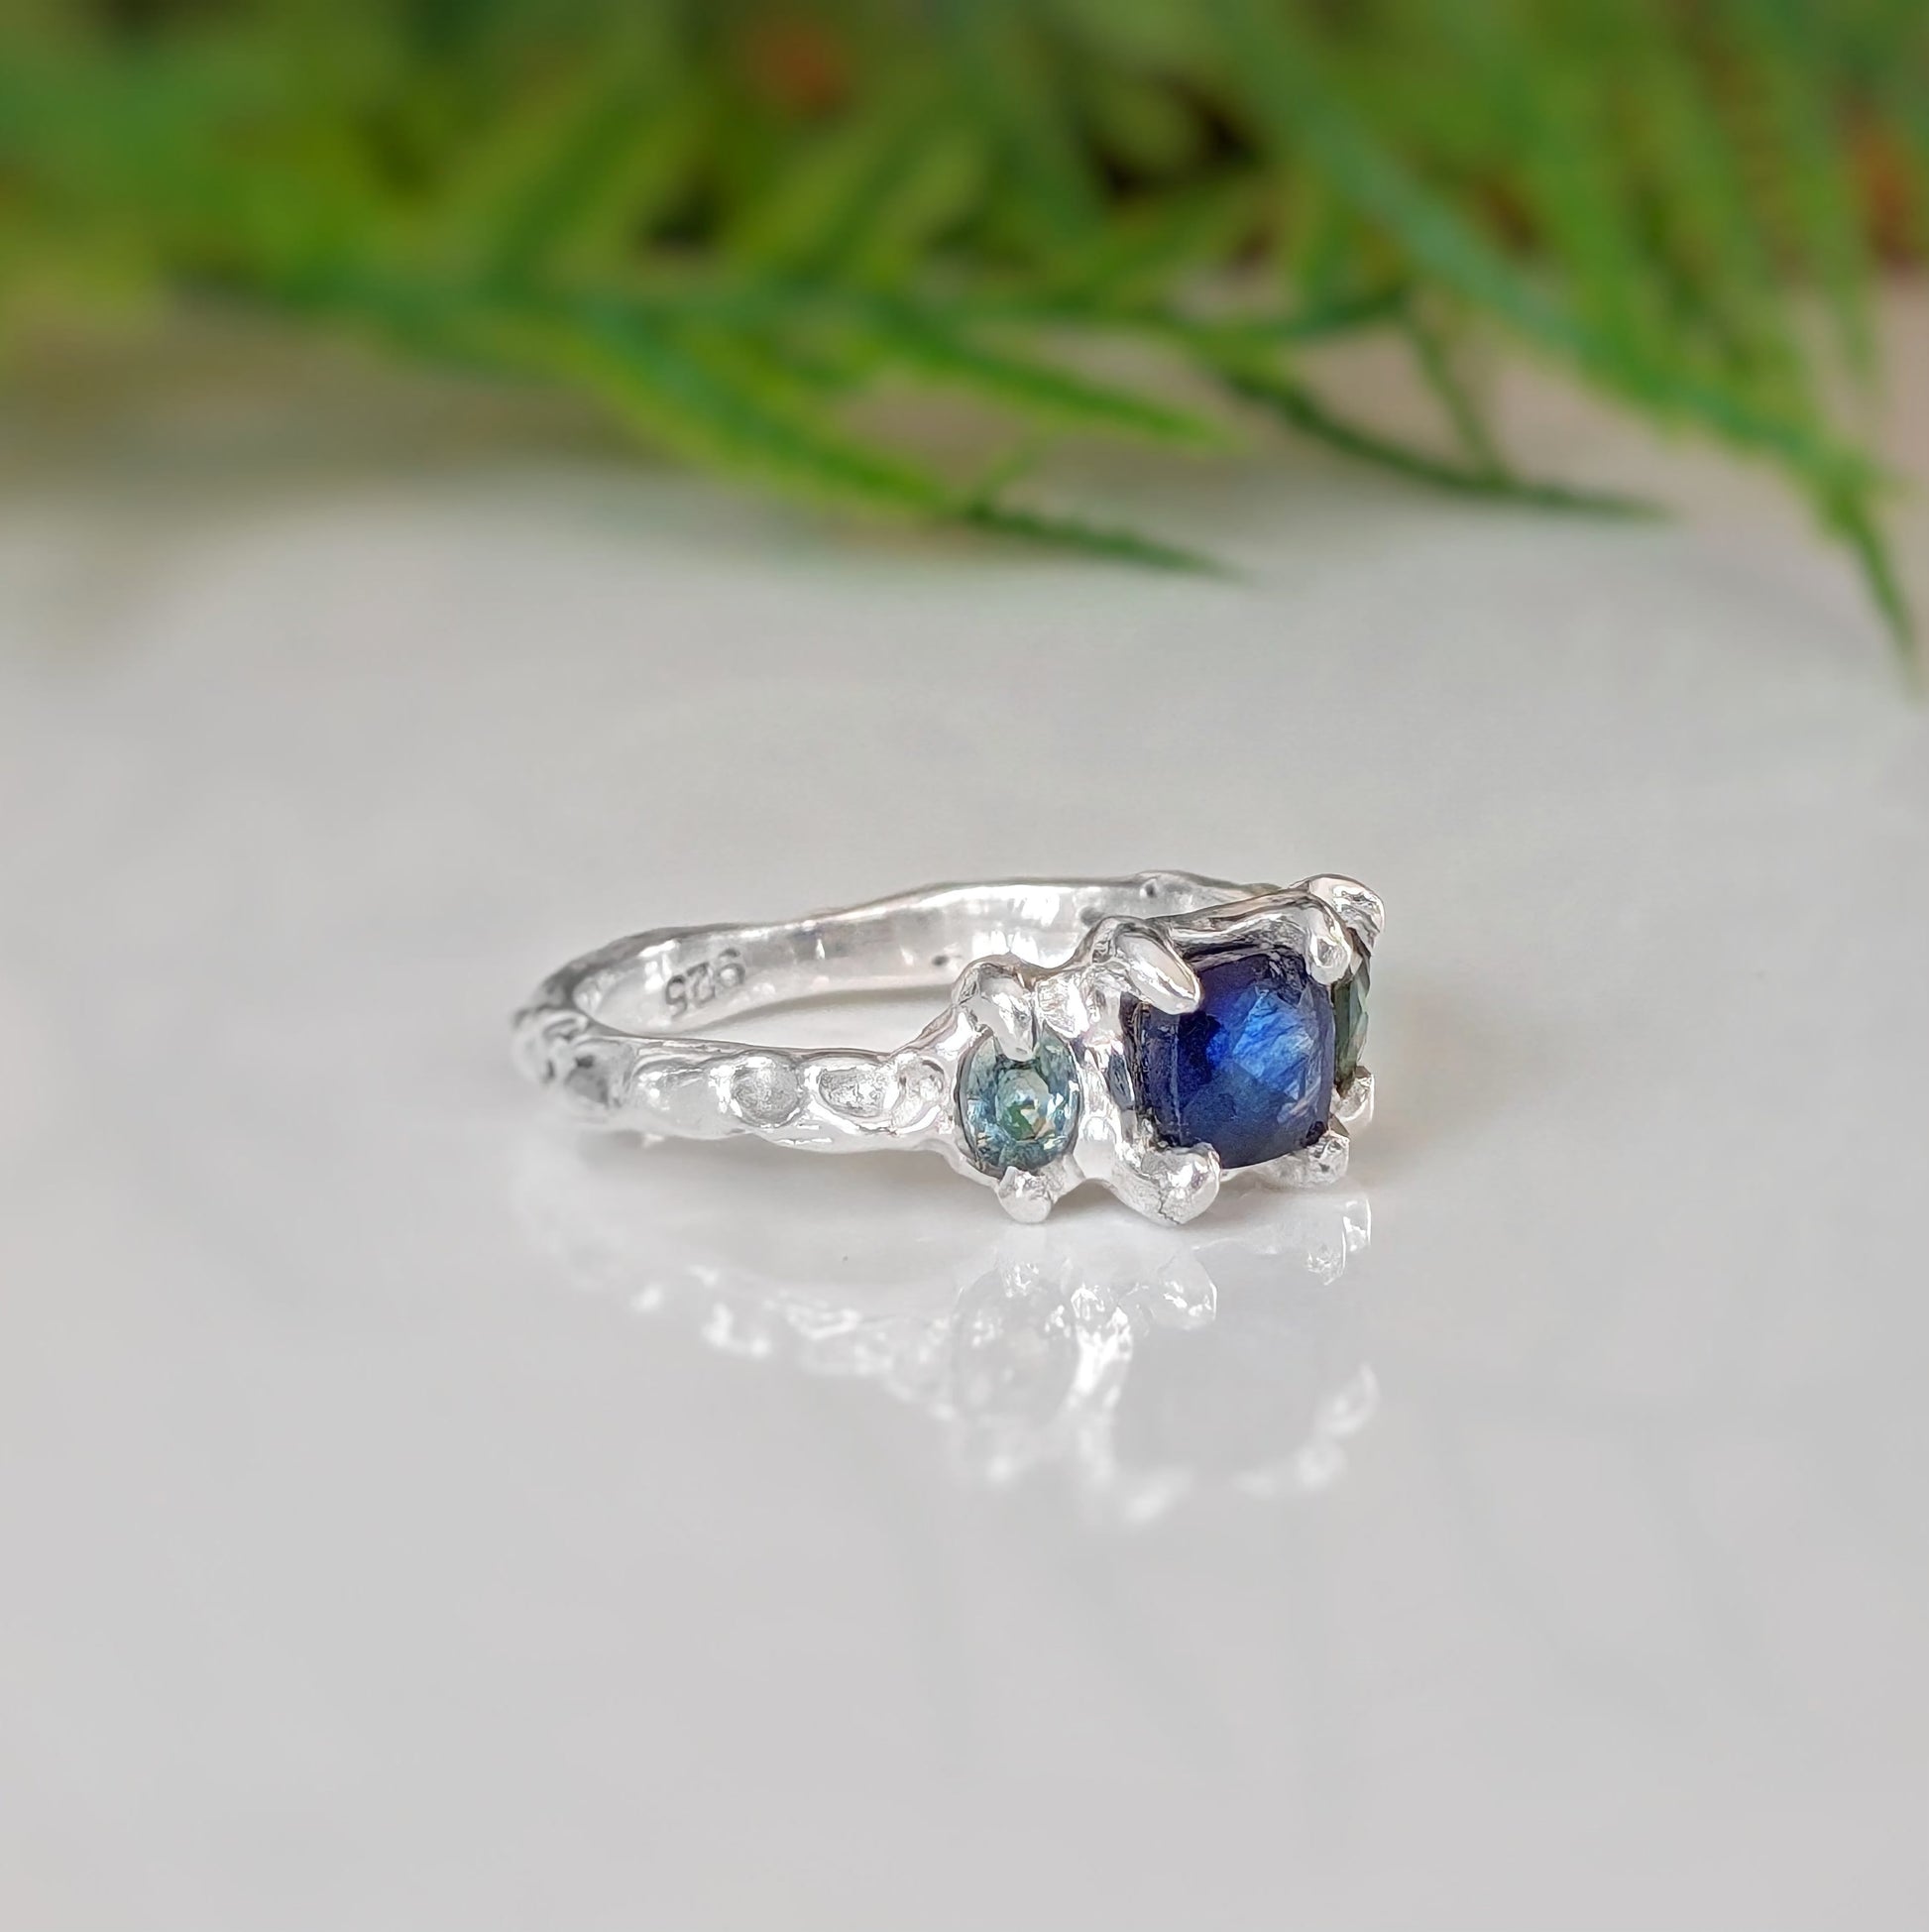 Blue Sapphire and Tourmaline ring in textured molten Silver setting